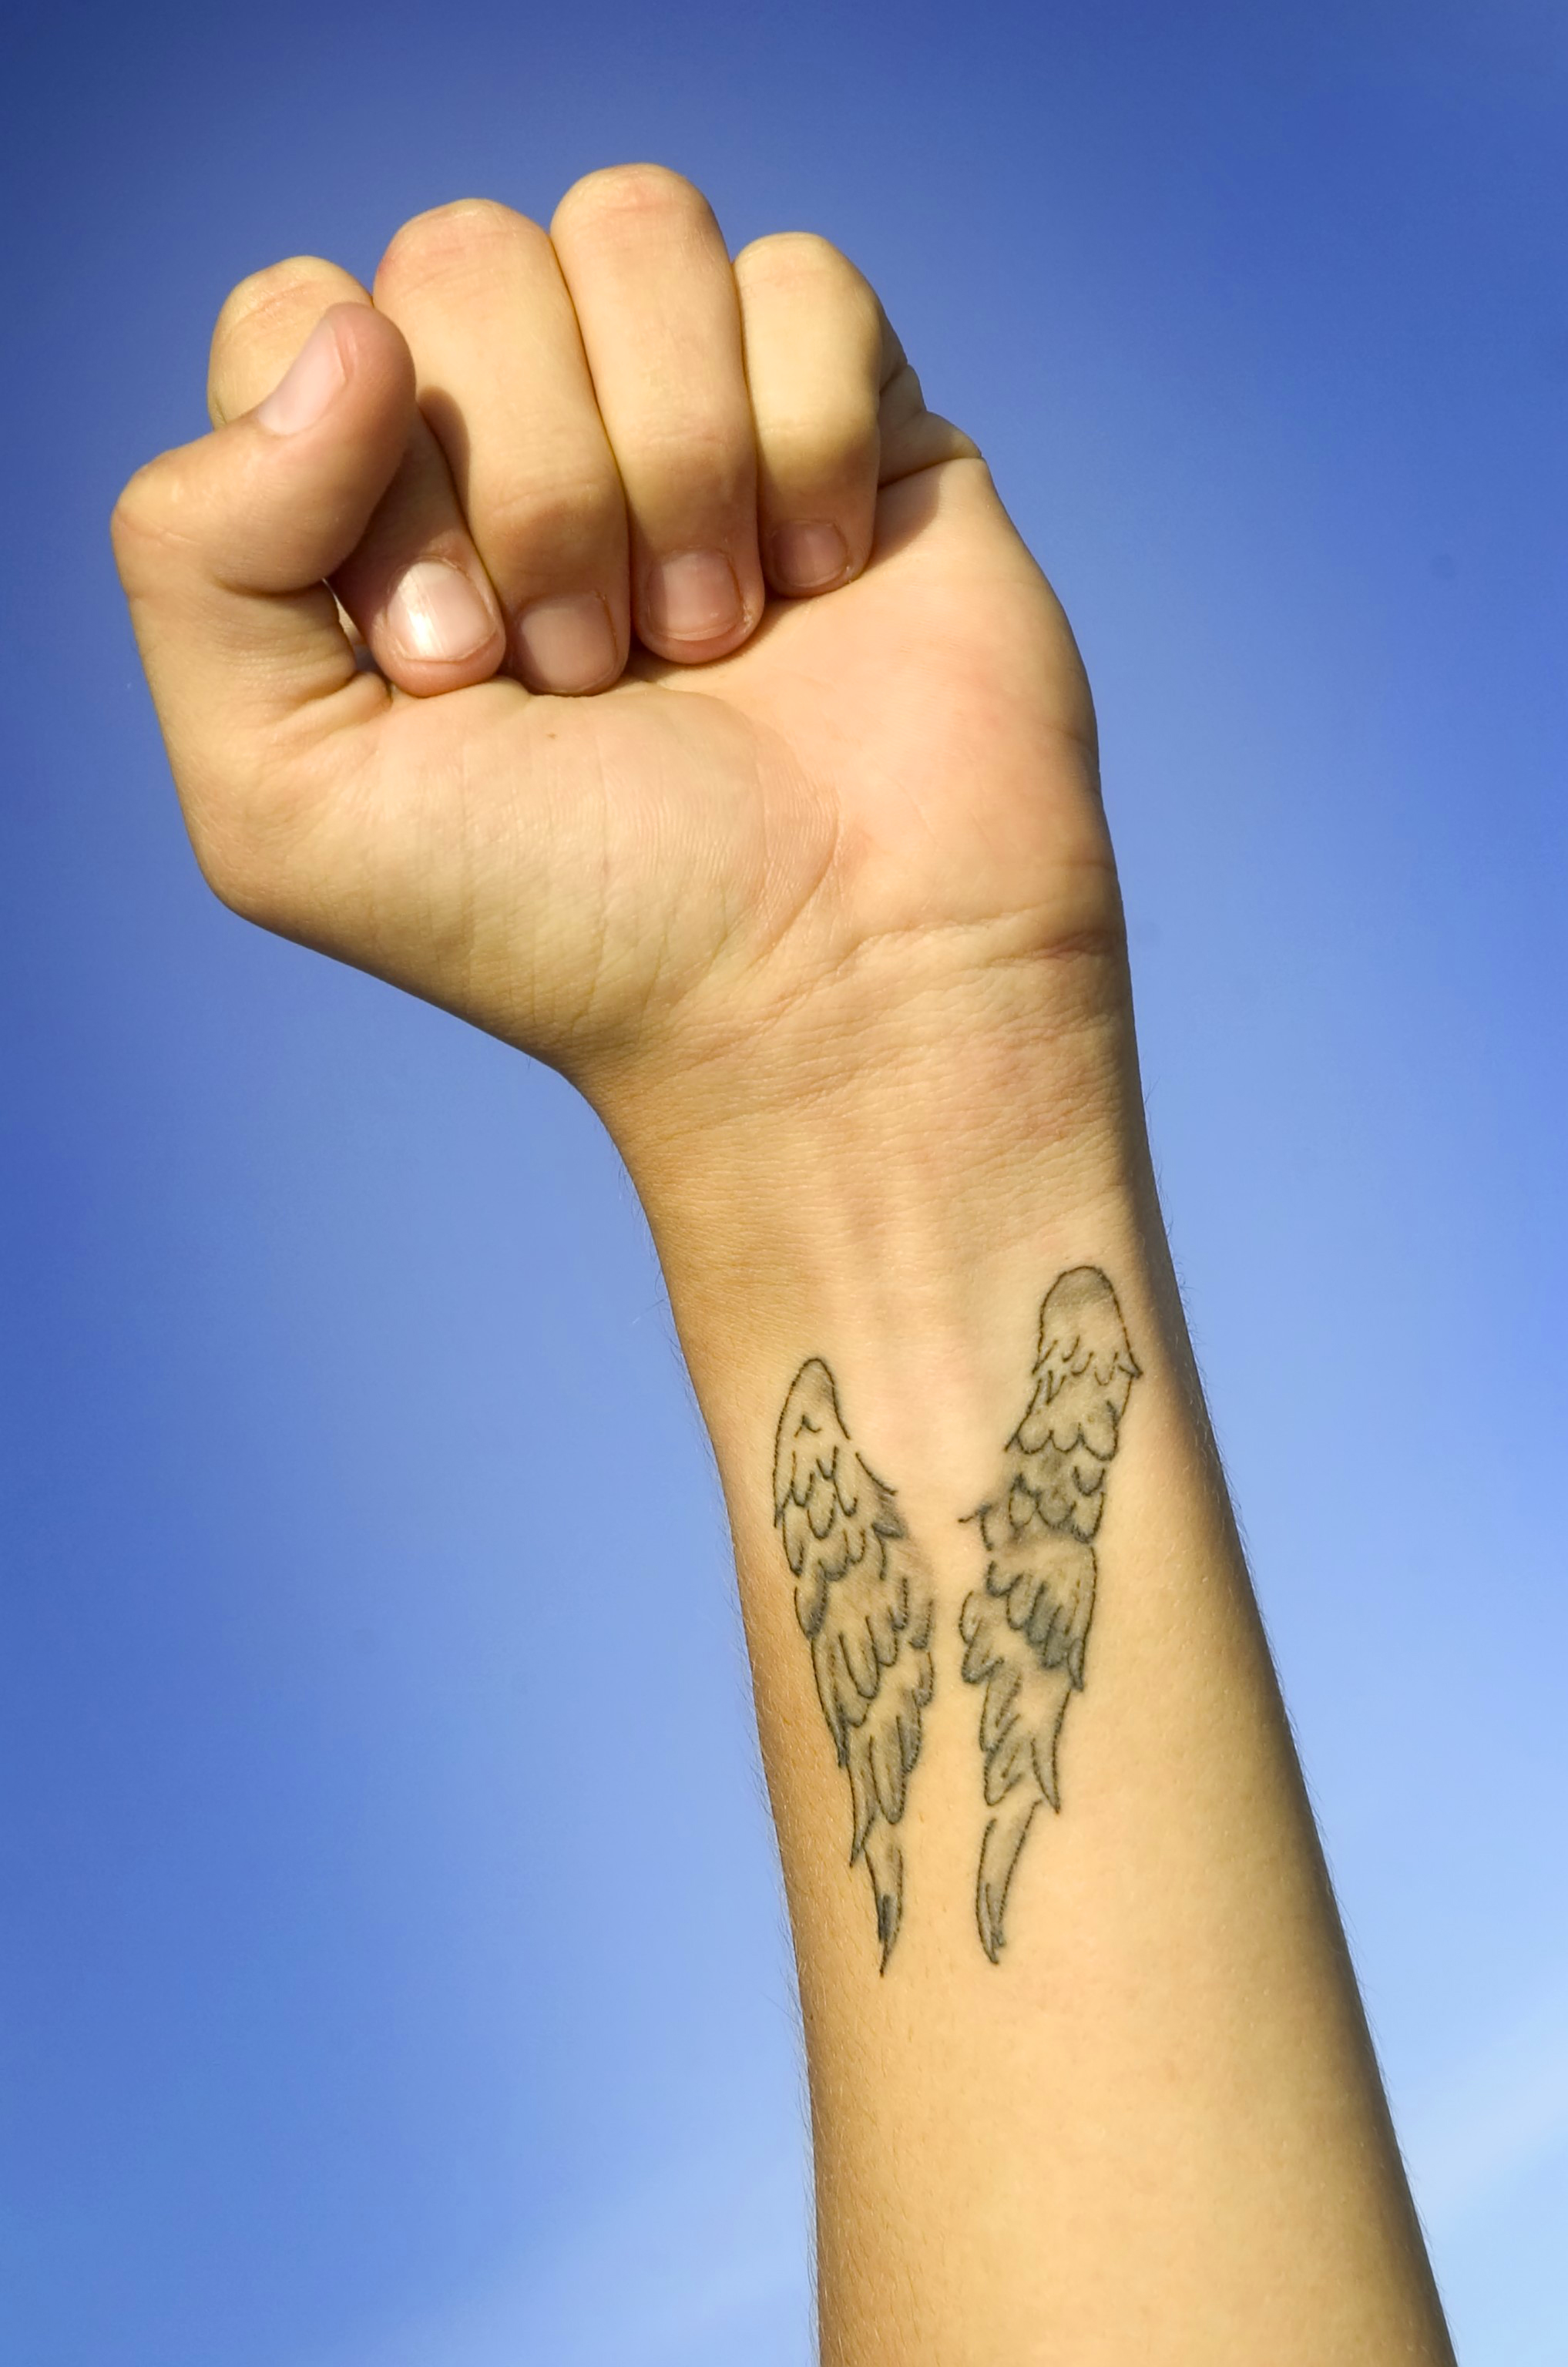 68 Heavenly Ideas For Mother And Son Tattoo With Their Symbolism!